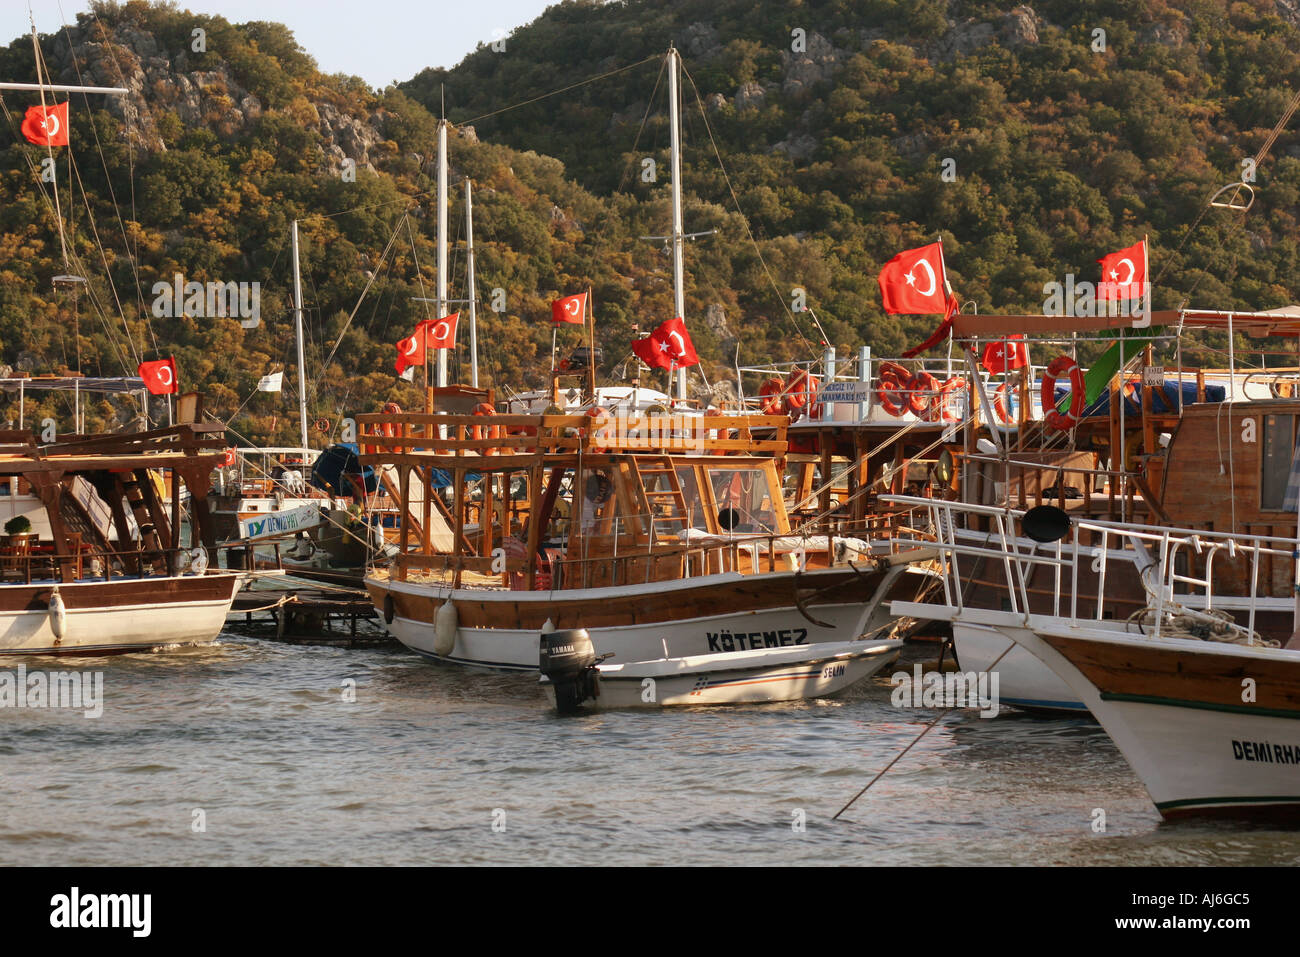 Yachts and gulets moored in Ucagiz harbour Anatolia southern Turkey with many flags  Stock Photo